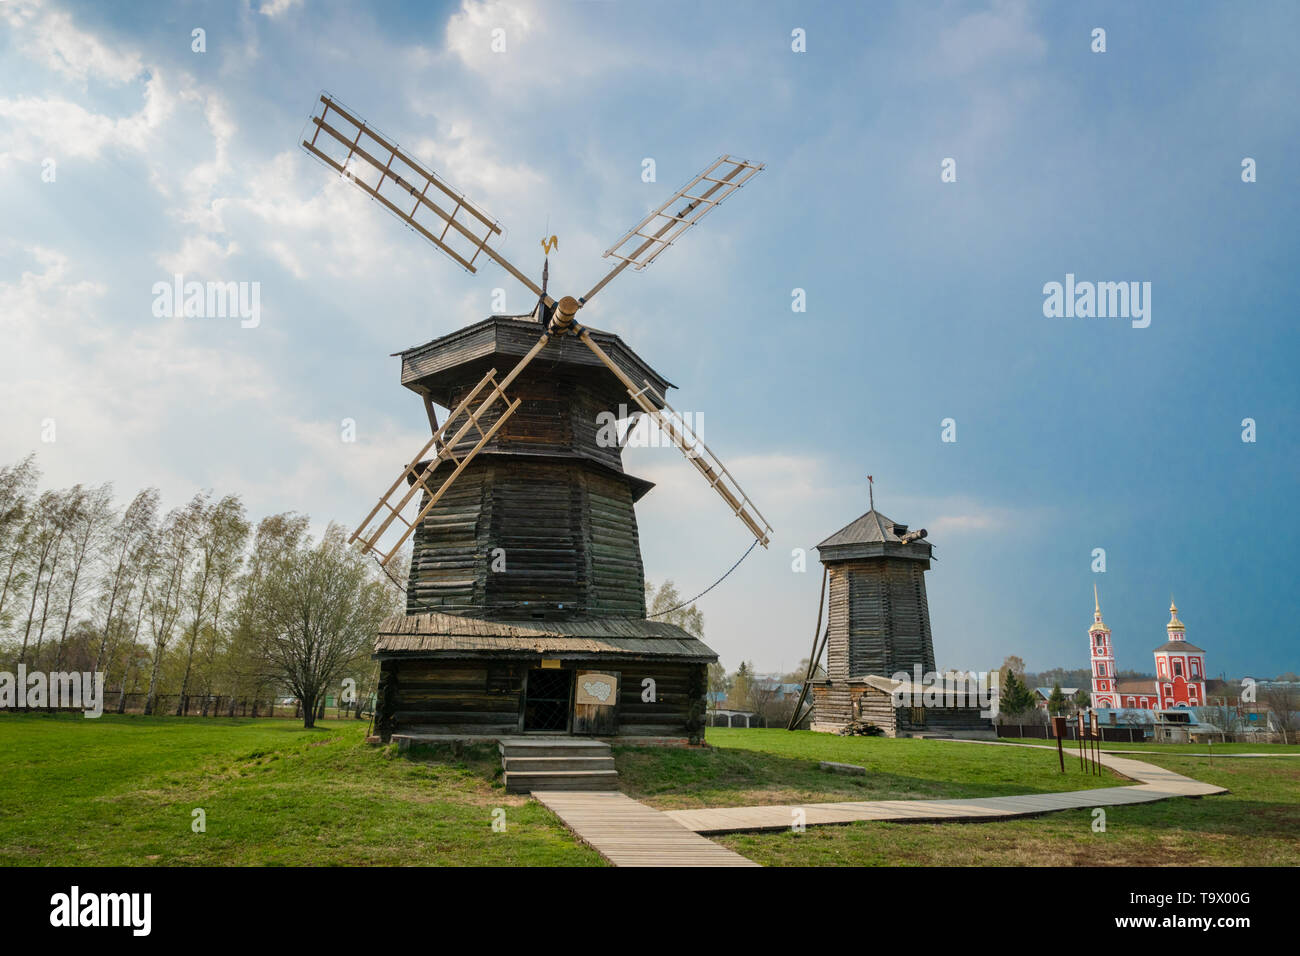 Suzdal, Russia - May 2019:  Wooden traditional buildings in the museum of wooden architecture in Suzdal, Russia. Suzdal is a Golden Ring town Stock Photo